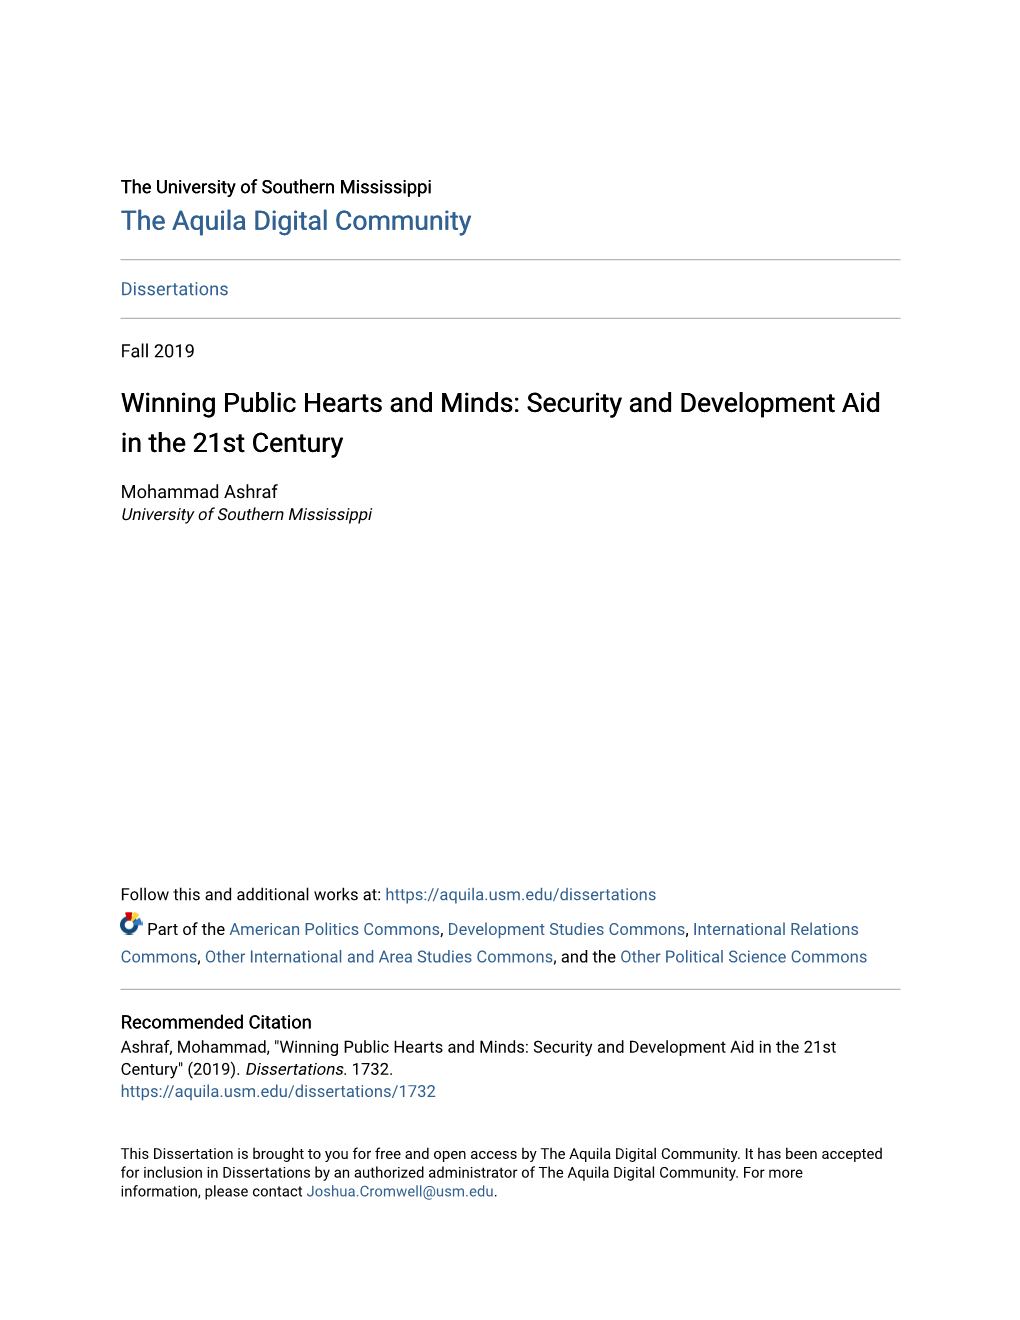 Winning Public Hearts and Minds: Security and Development Aid in the 21St Century